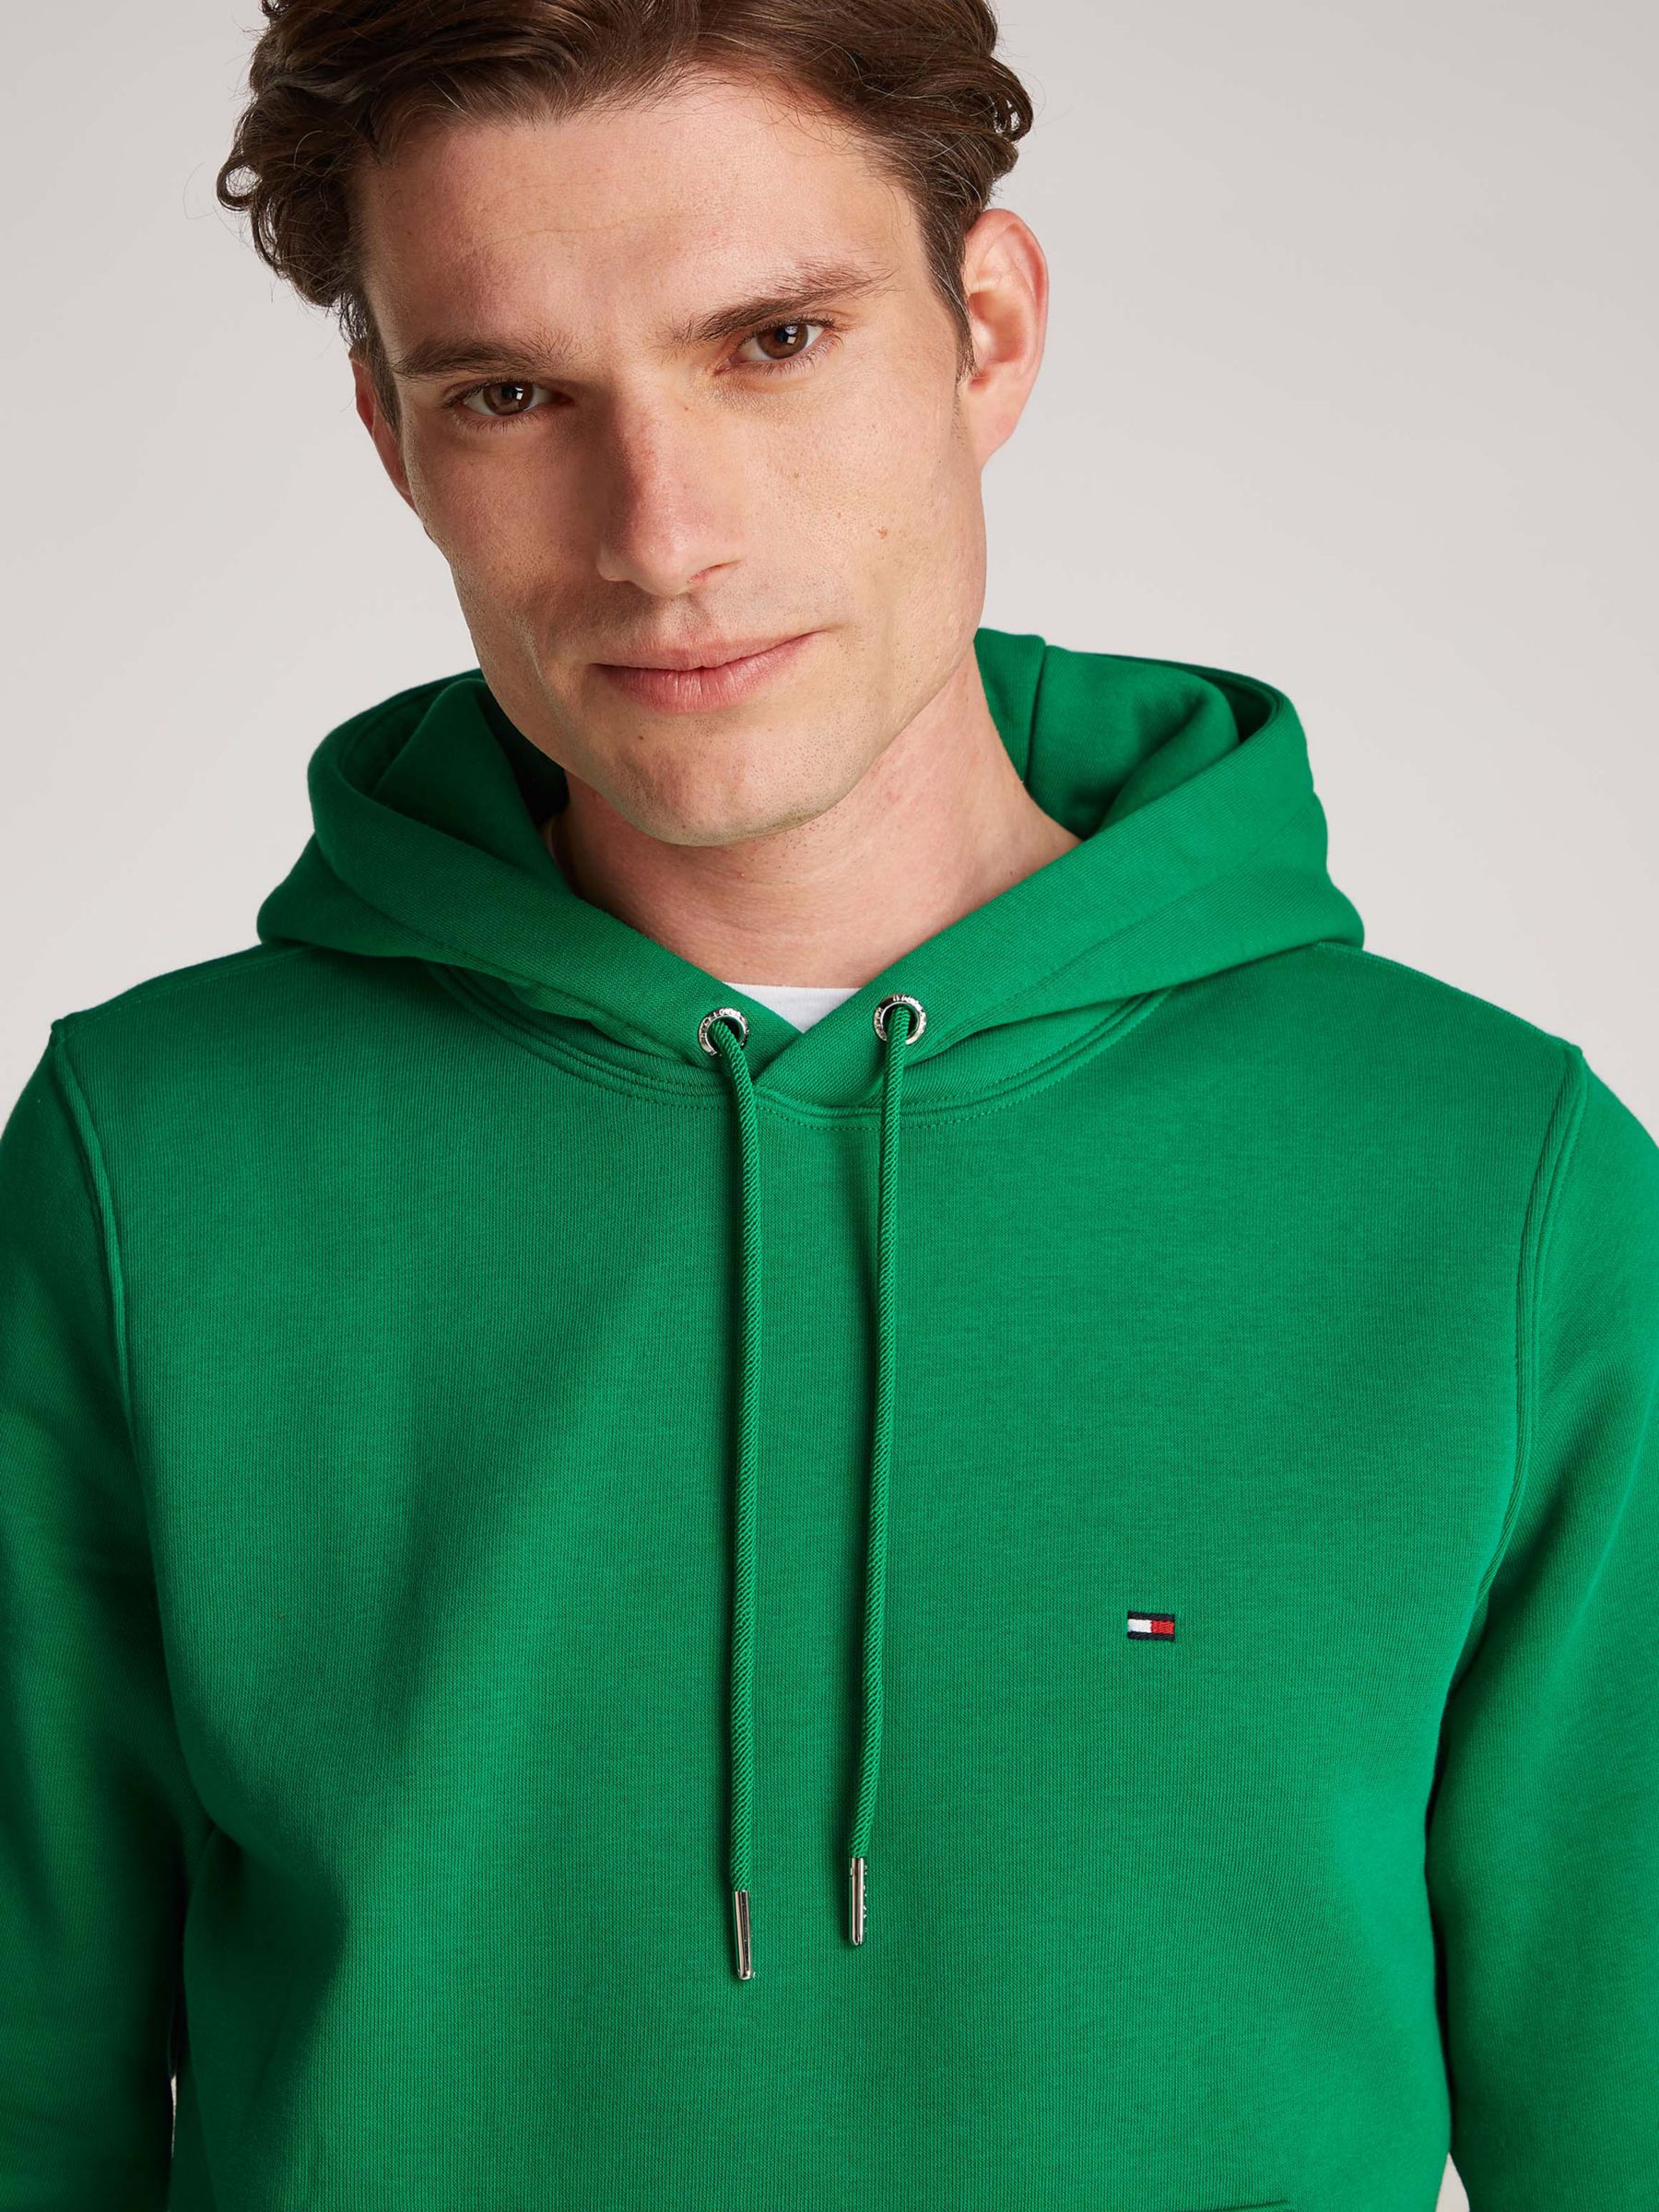 Tommy Hilfiger Classic Flag Hoodie, Olympic Green, XXL